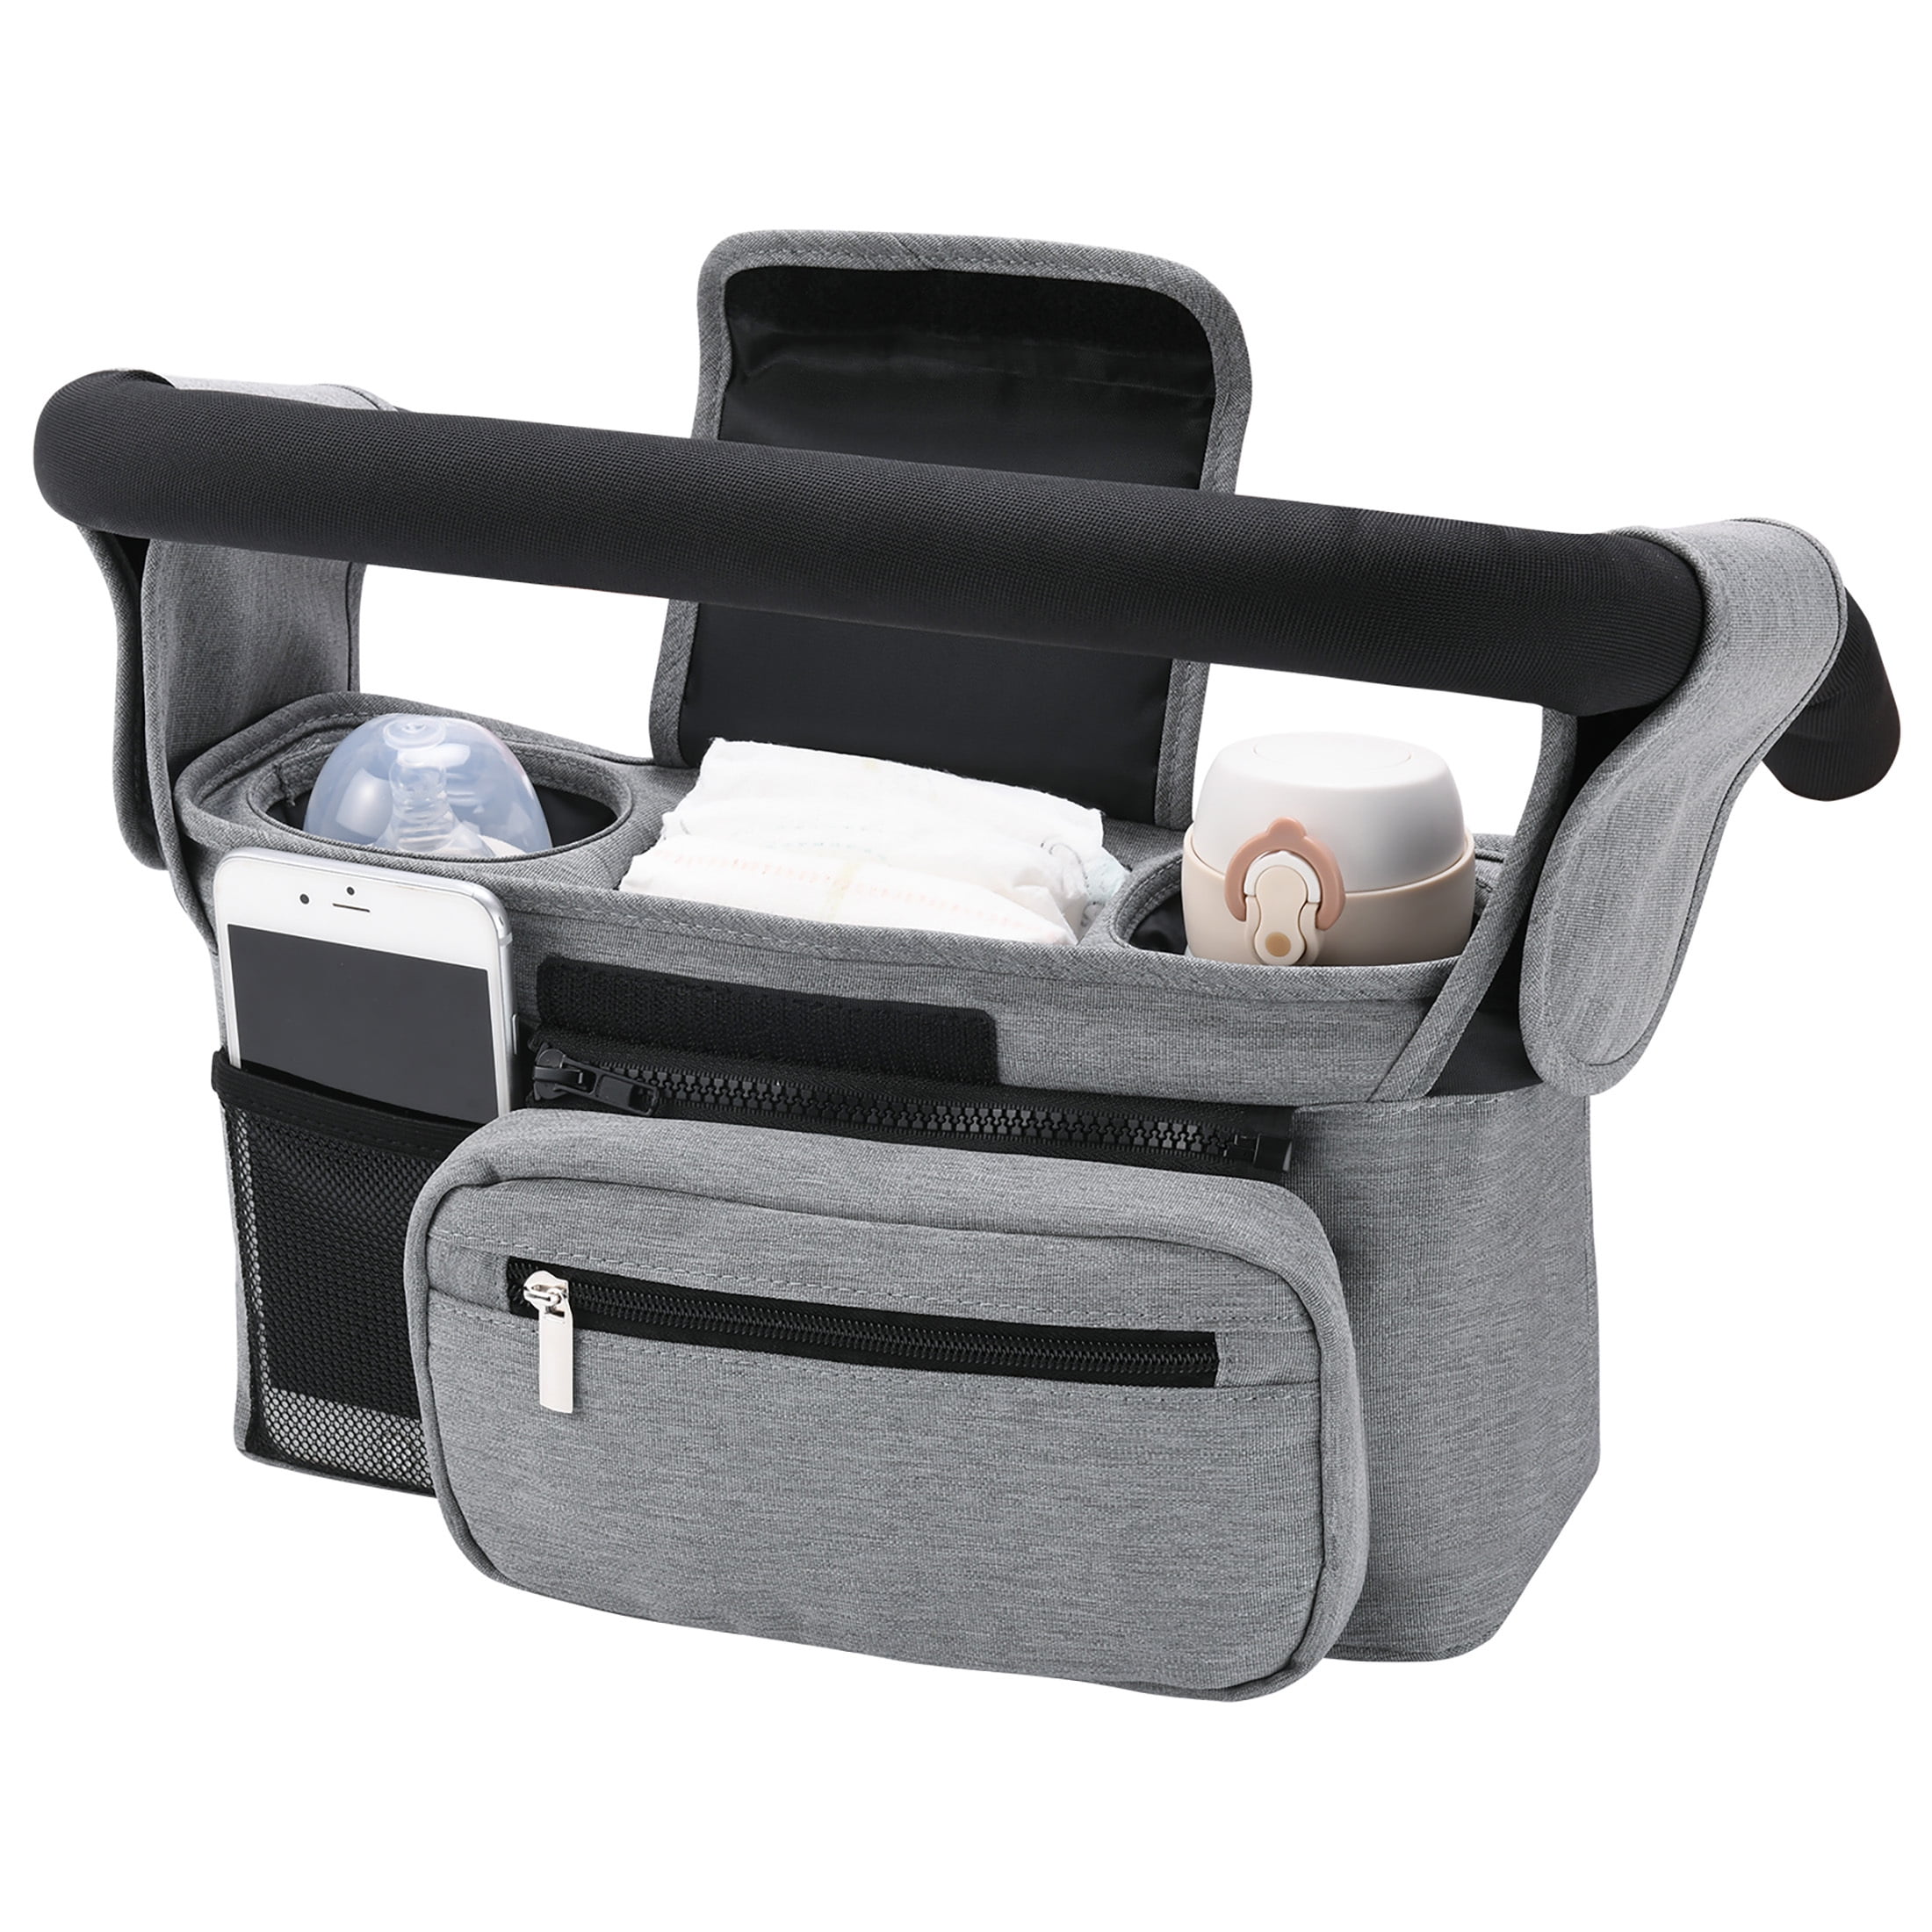 Baby Stroller Organizer Universal Baby Jogger Caddy with Two Insulated Cup Holders Wipes Pocket and Shoulder Strap Stroller Accessories 